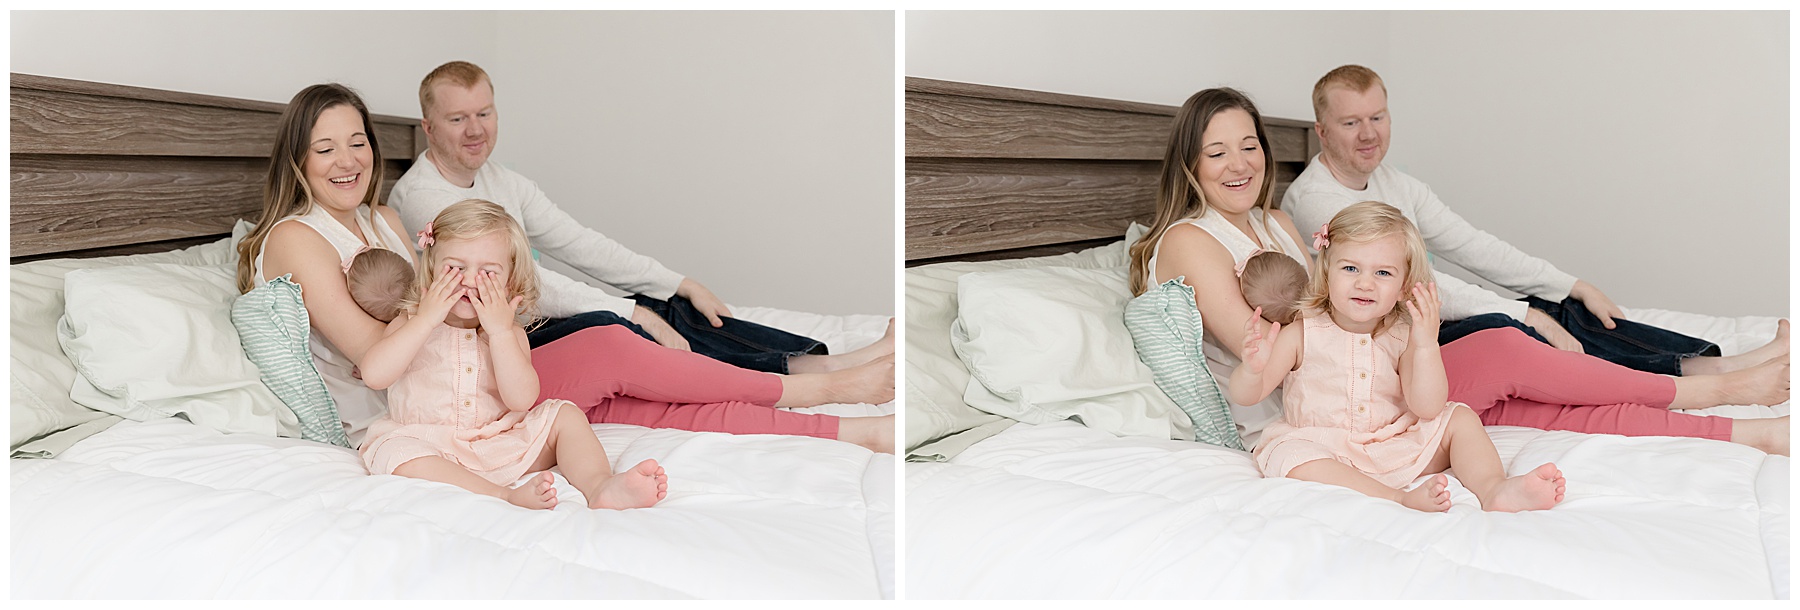 more peekaboo playtime on parent's bed, photos with a toddler can be fun